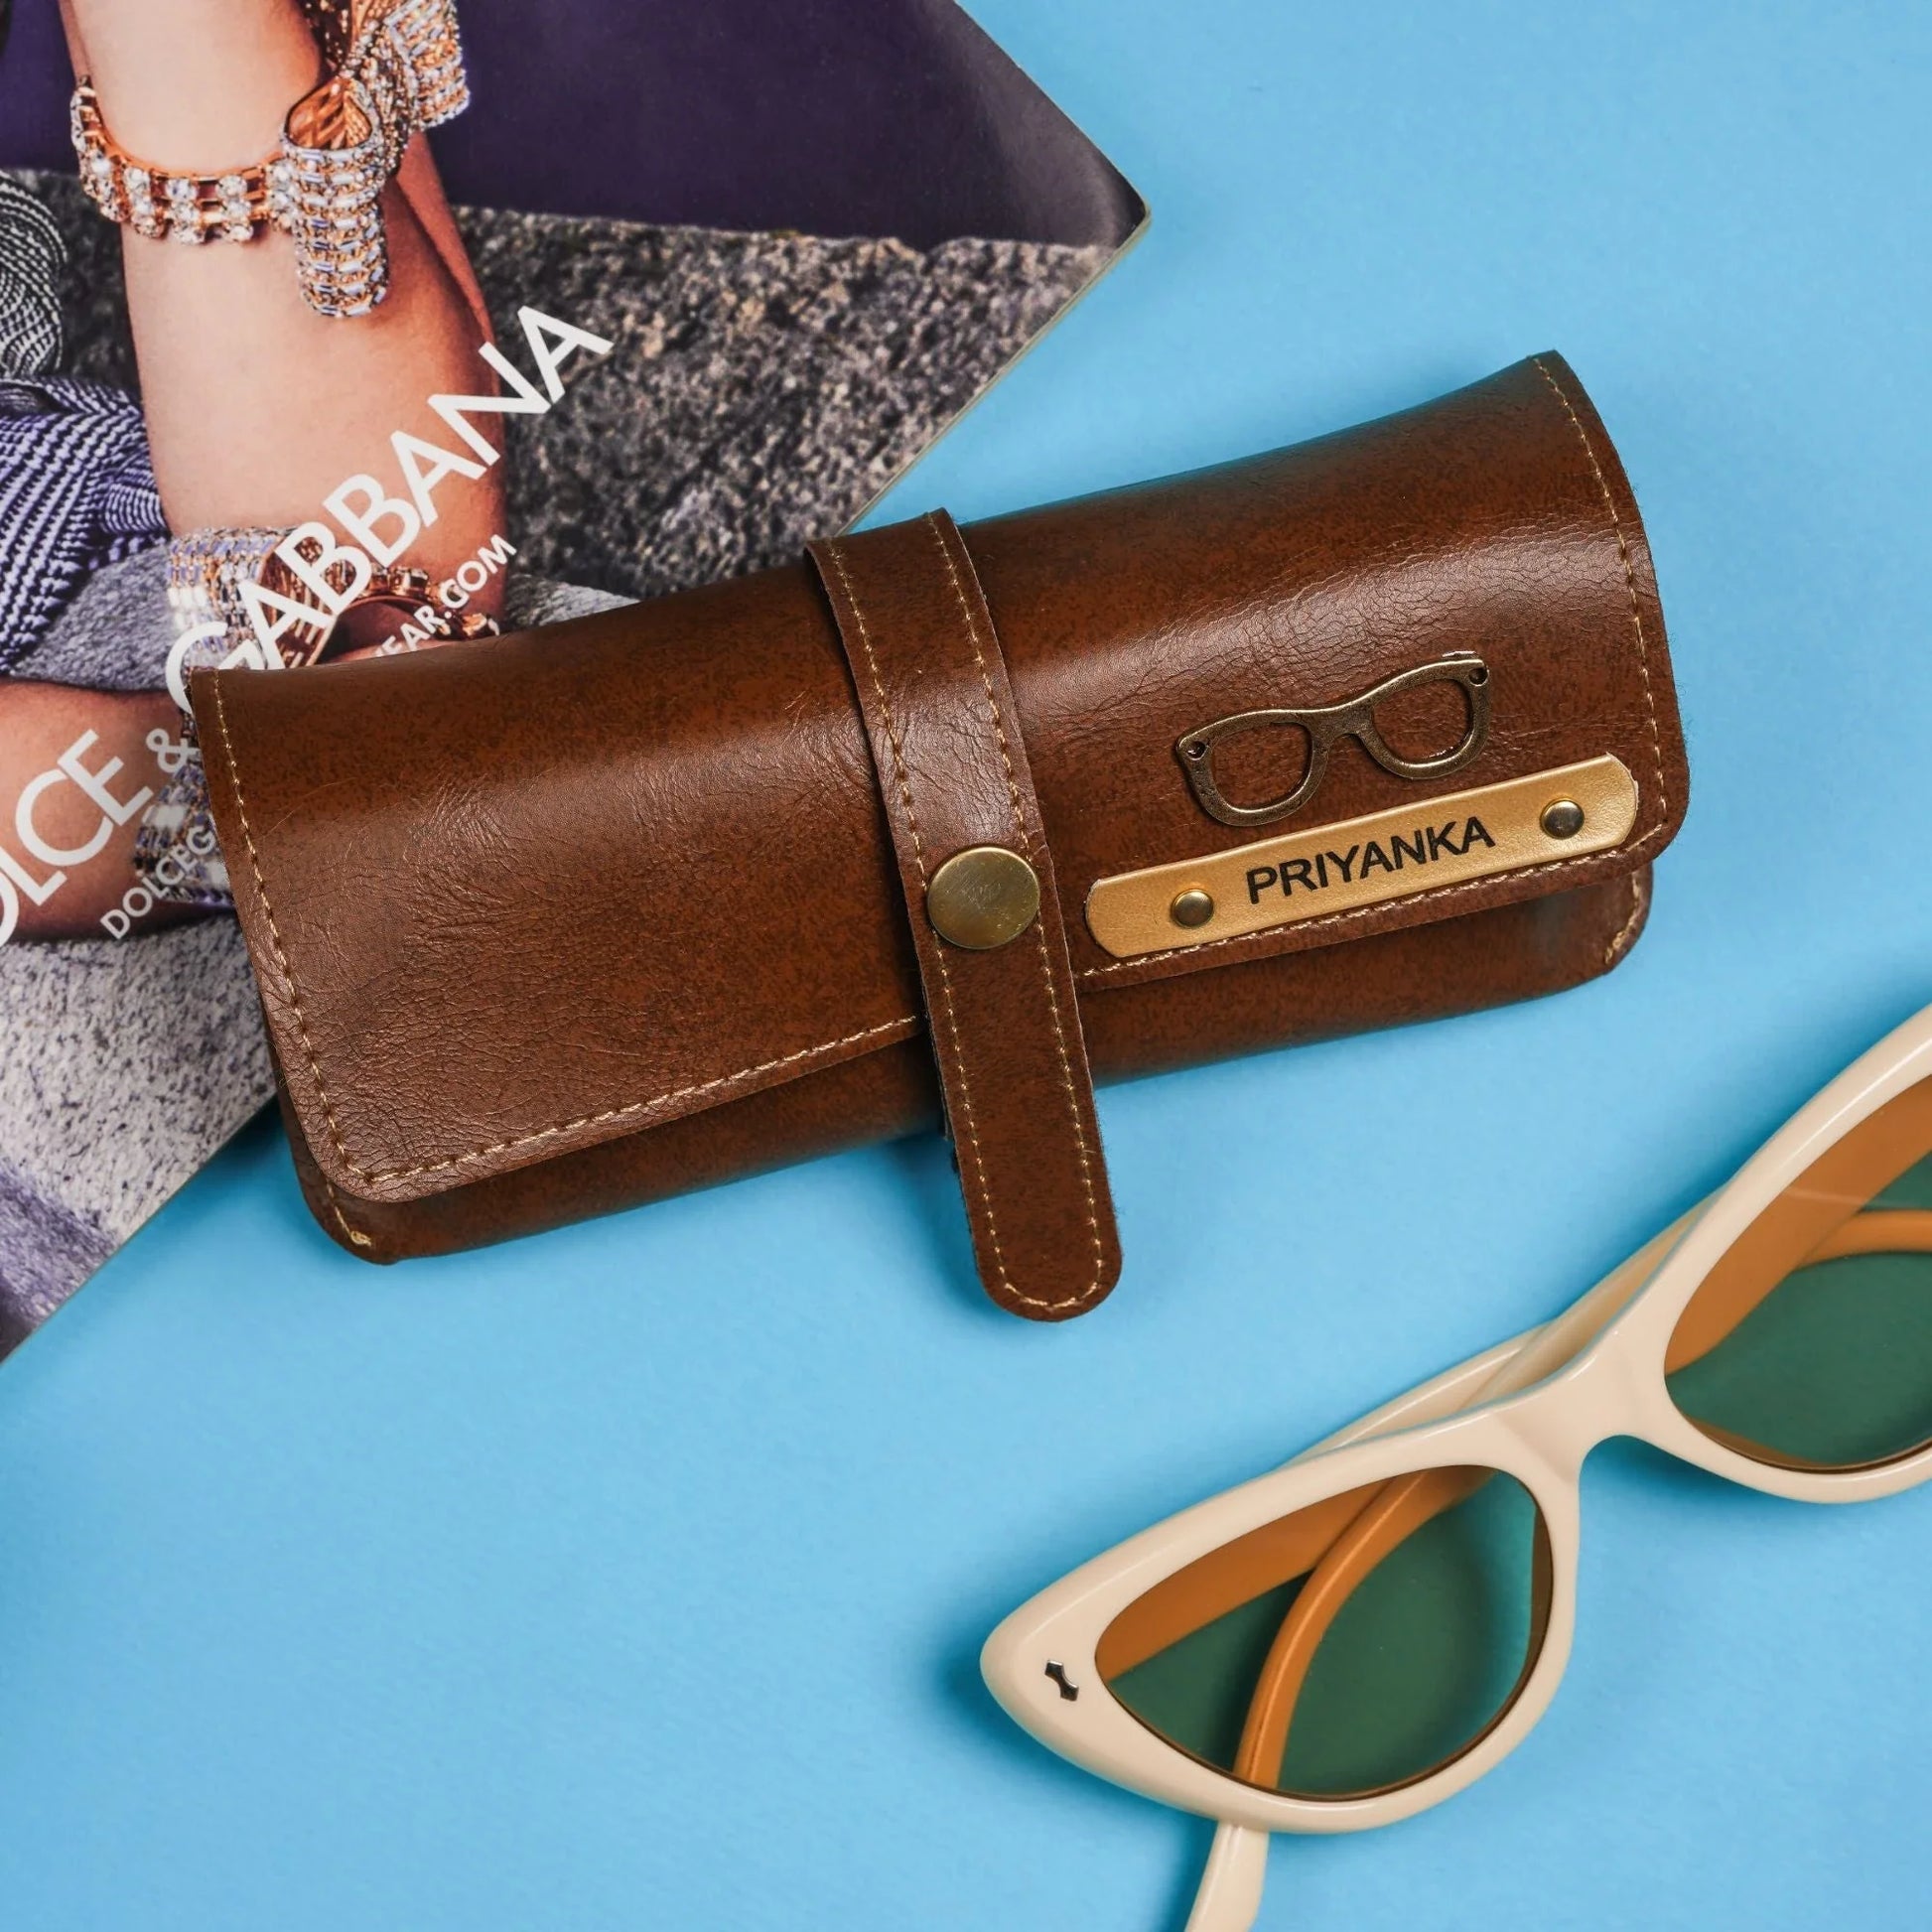 Protect your sunglasses in style with our custom sunglasses case! Whether you're shopping for yourself or searching for the perfect gift, this case is the ideal choice, with a variety of colors and styles to choose from and the option to add your own personal touch with a custom monogram or design.